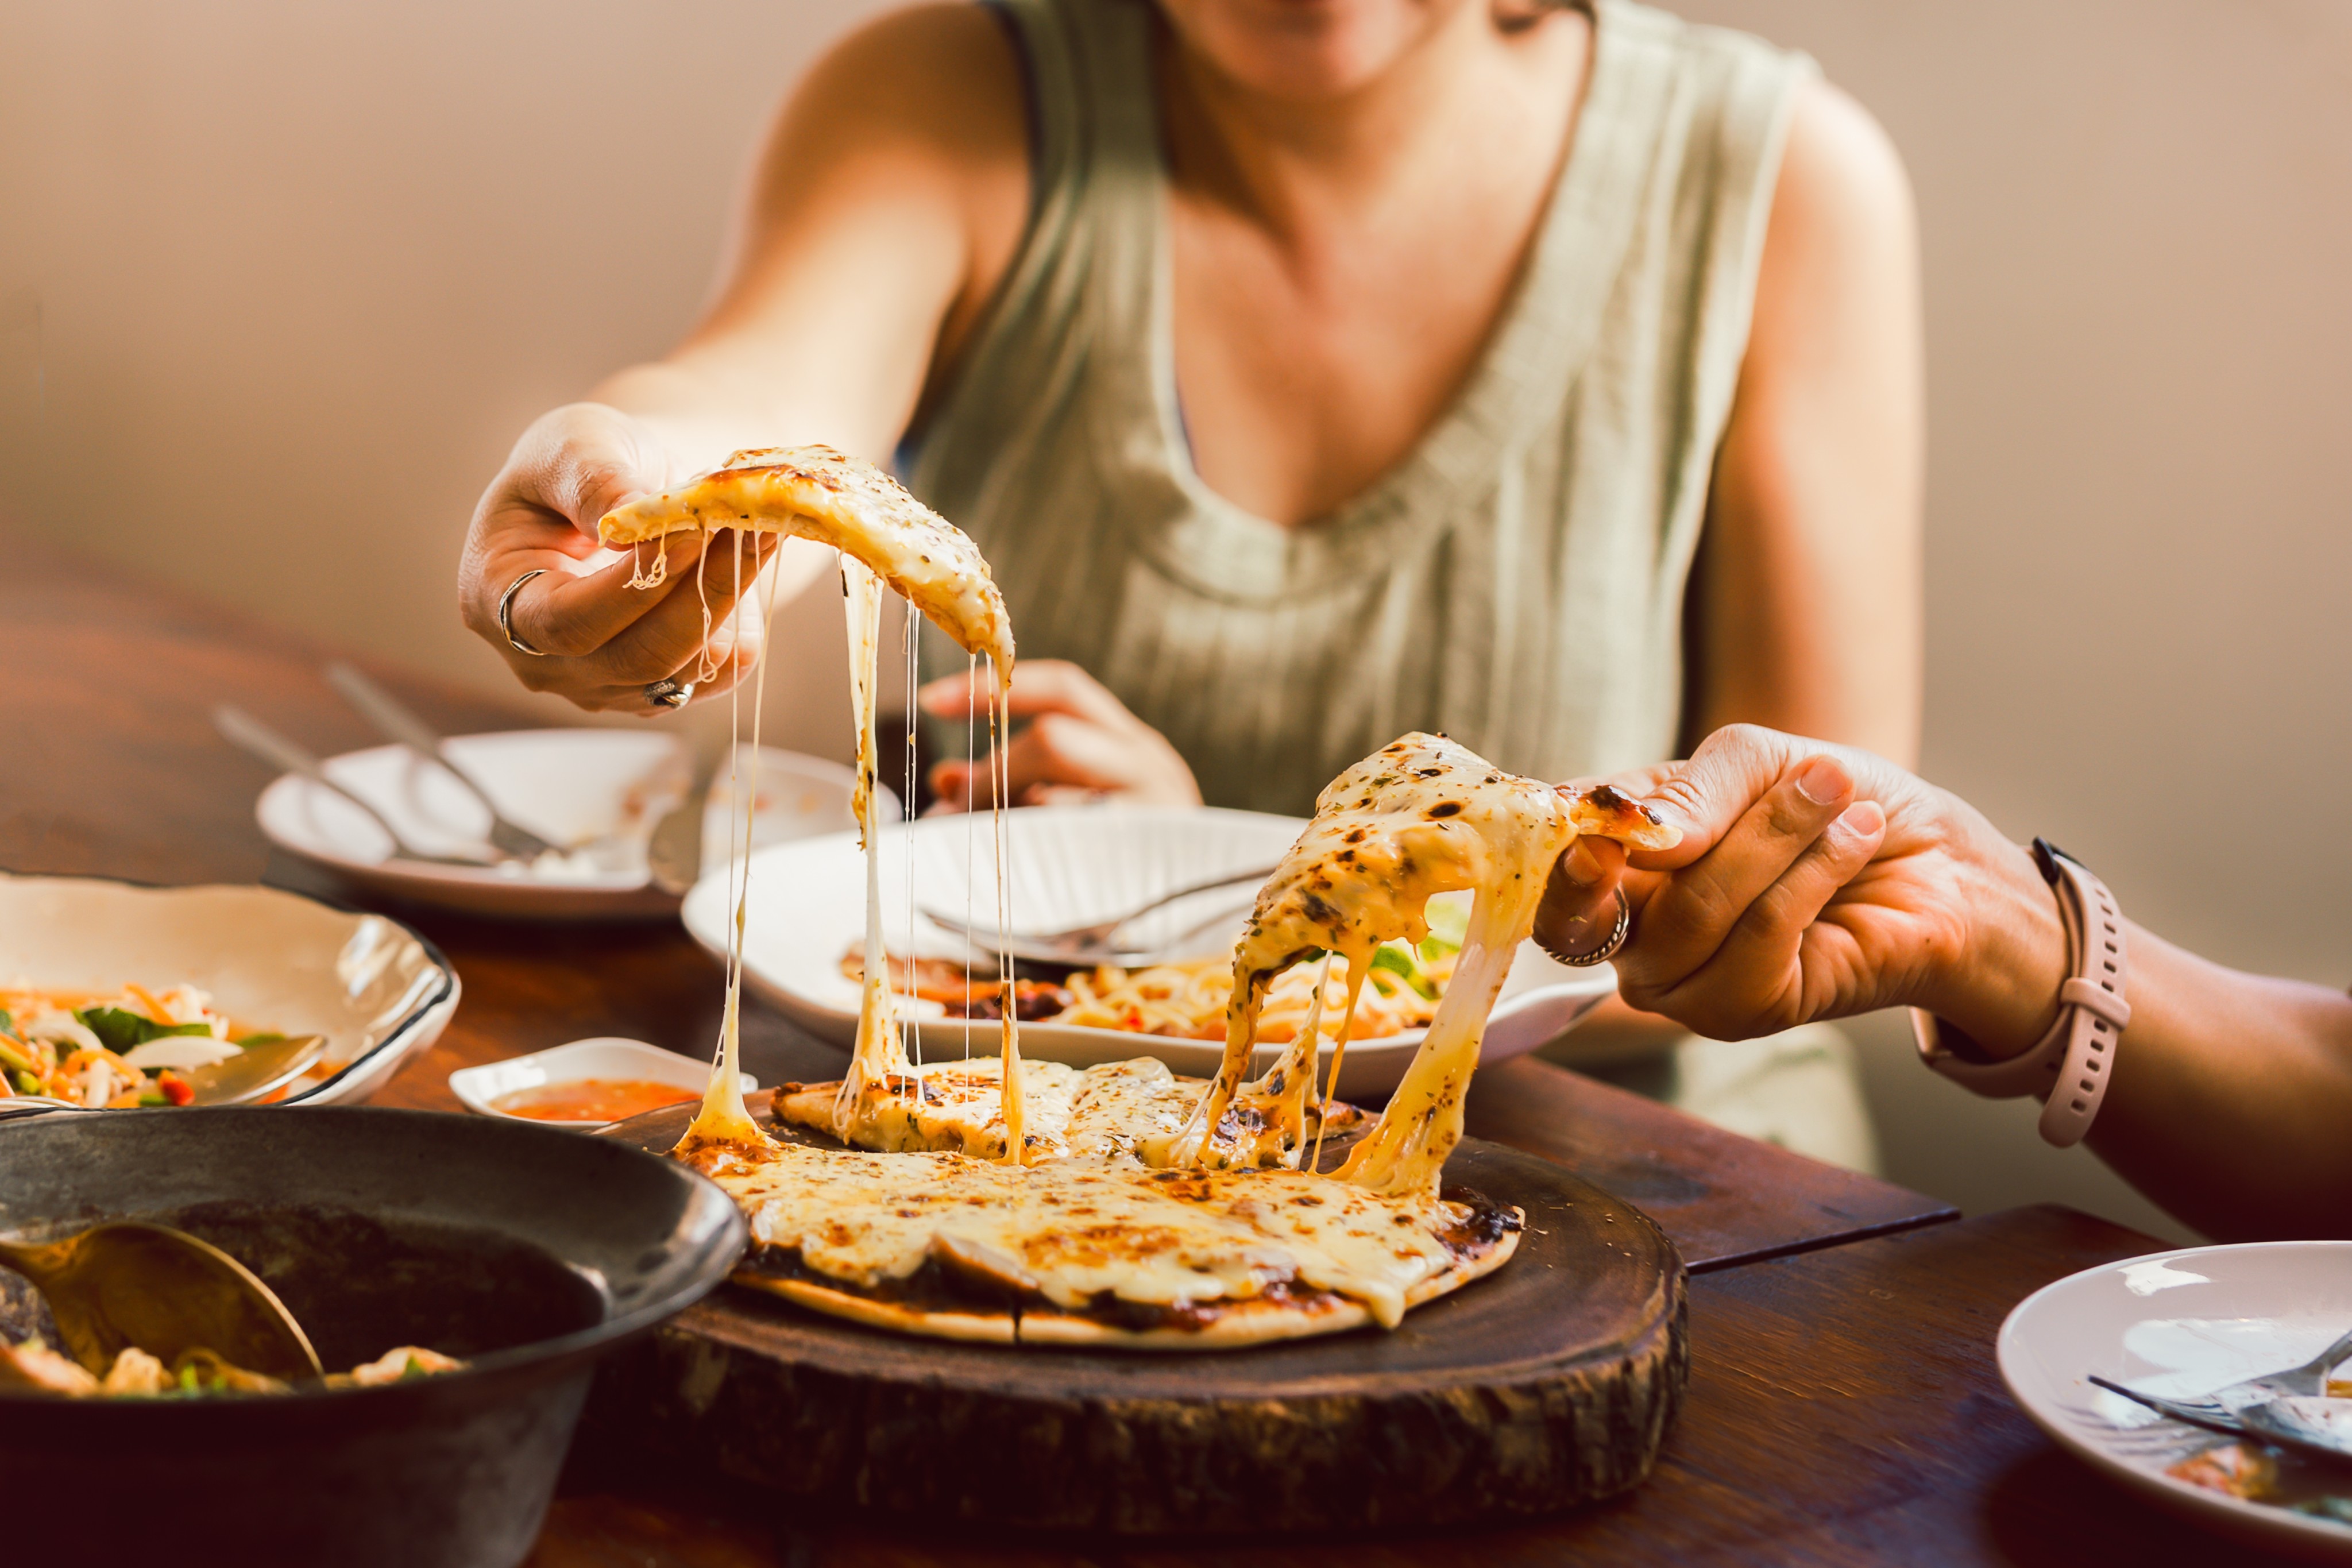 Intuitive eating is a big TikTok and Instagram trend now and is related to a number of physical and mental health benefits. It involves listening to internal hunger cues - and doesn’t mean you have to feel guilty about eating things like pizza. Photo: Shutterstock